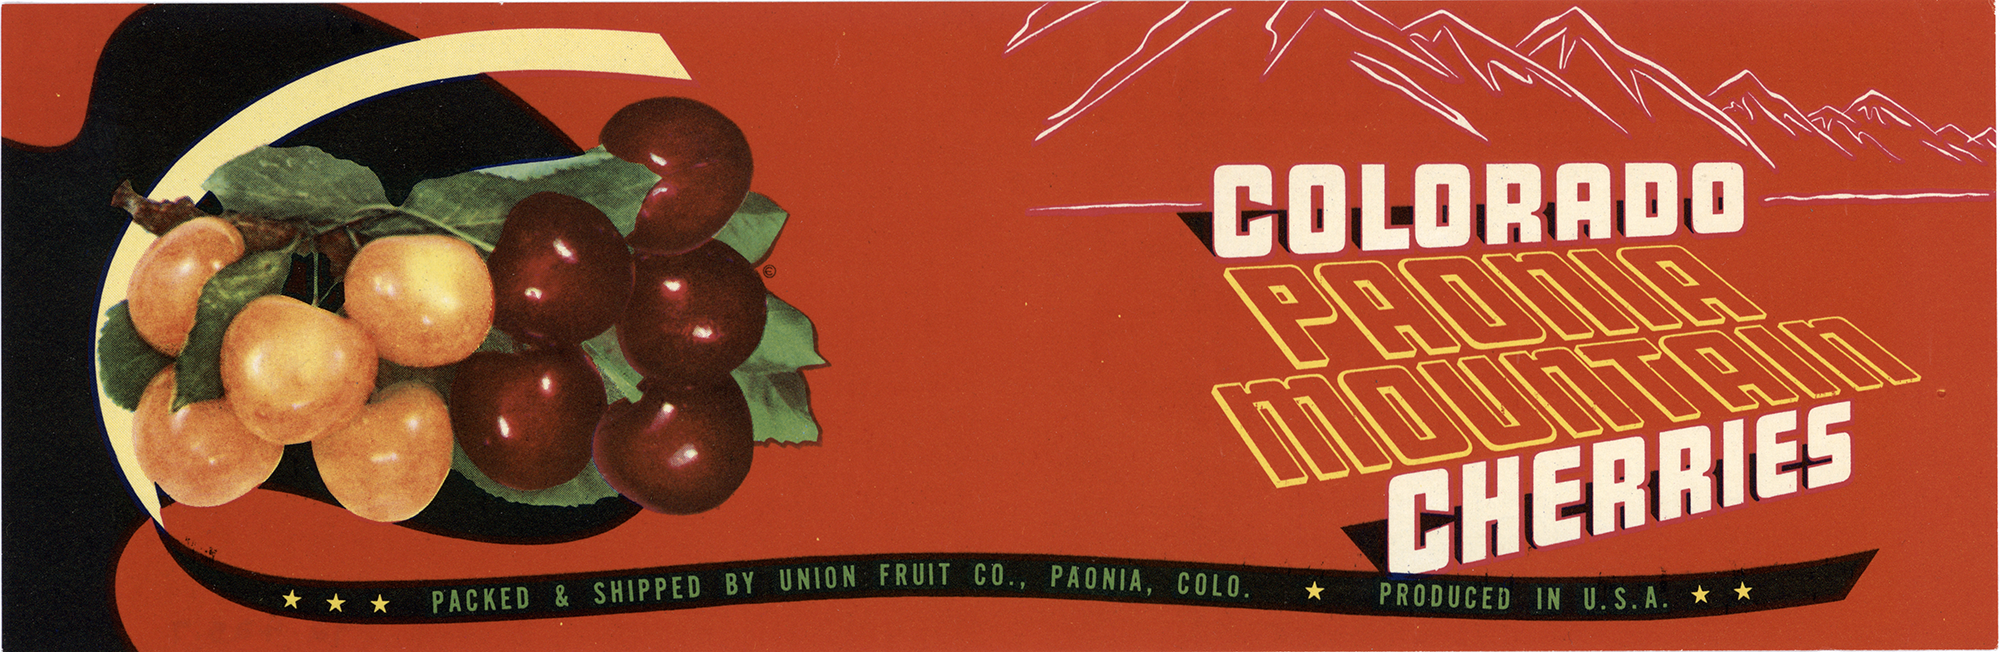 COLORADO PAONIA MOUNTAIN CHERRIES/PACKED & SHIPPED BY UNION FRUIT CO.,PAONIA,CO